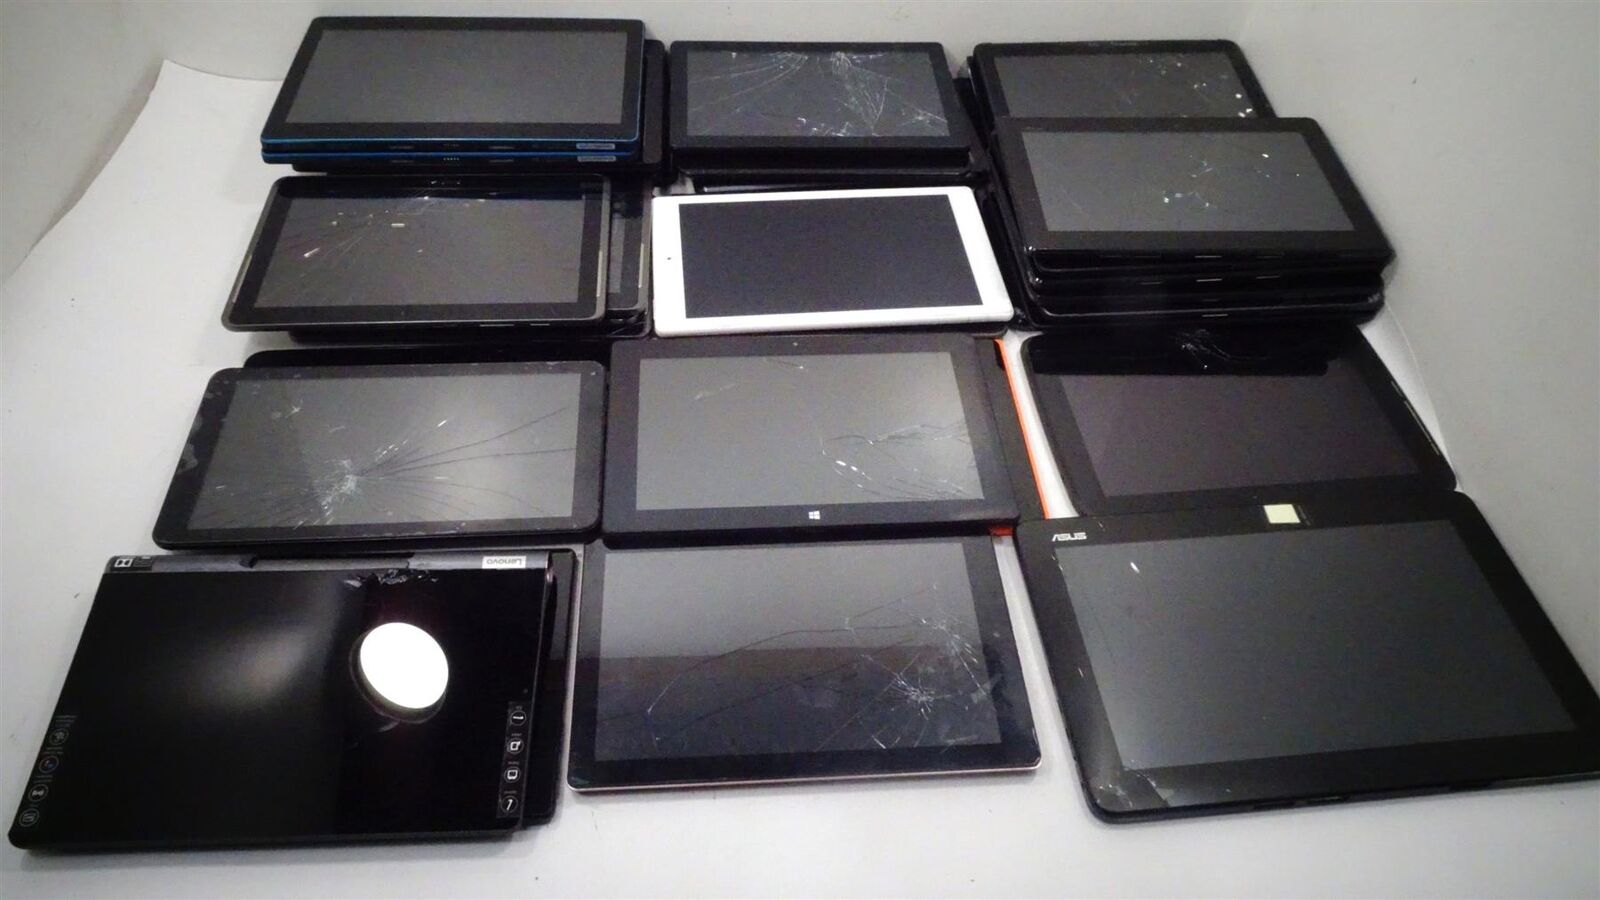 Lot 35 Mix Brands Tablets cracked screens - Please Read